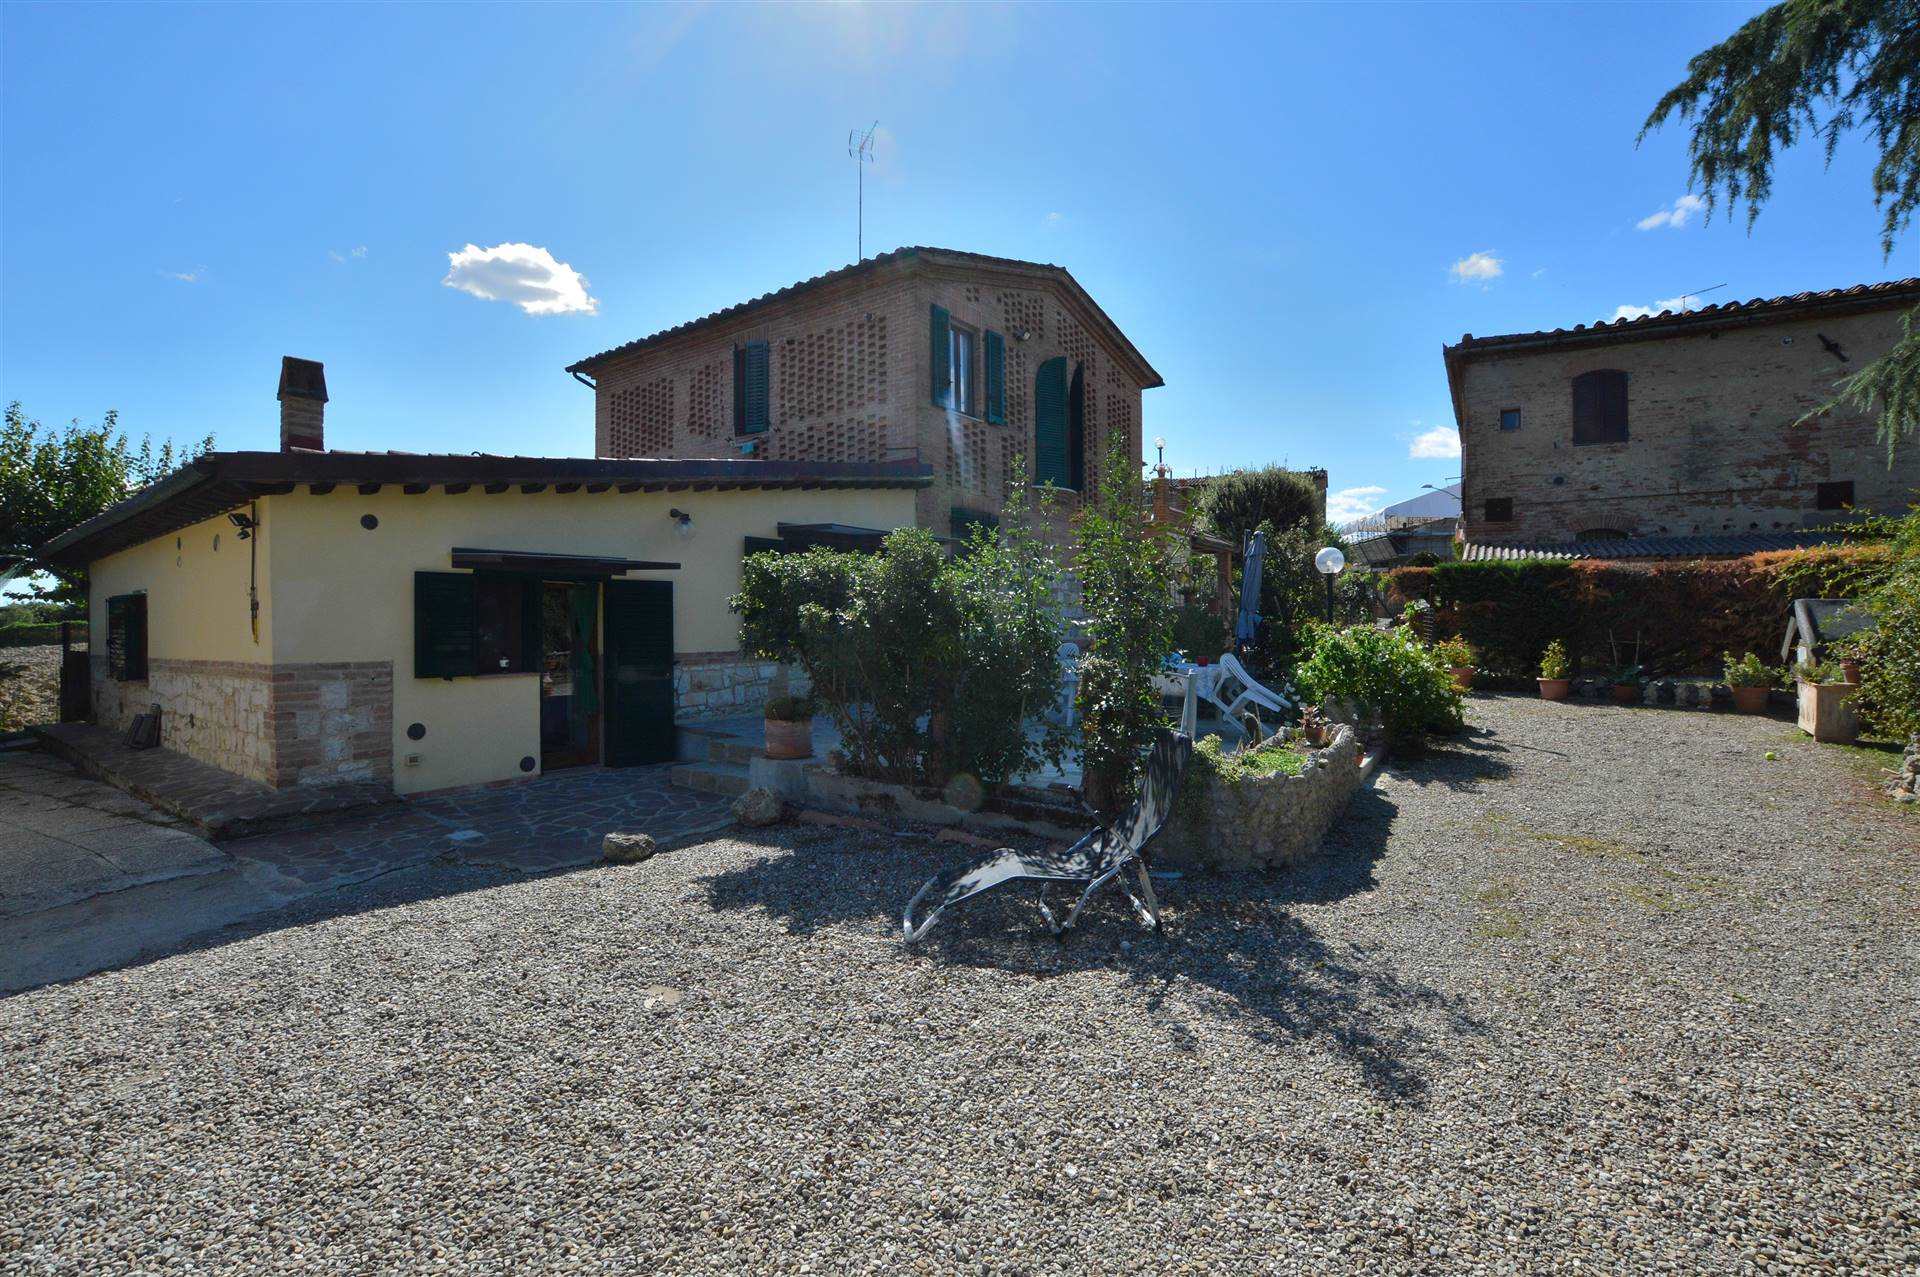 CENTRO, MONTERONI D'ARBIA, Apartment for sale of 236 Sq. mt., Excellent Condition, Heating Individual heating system, Energetic class: G, Epi: 175 kwh/m2 year, placed at Ground on 1, composed by: 12 